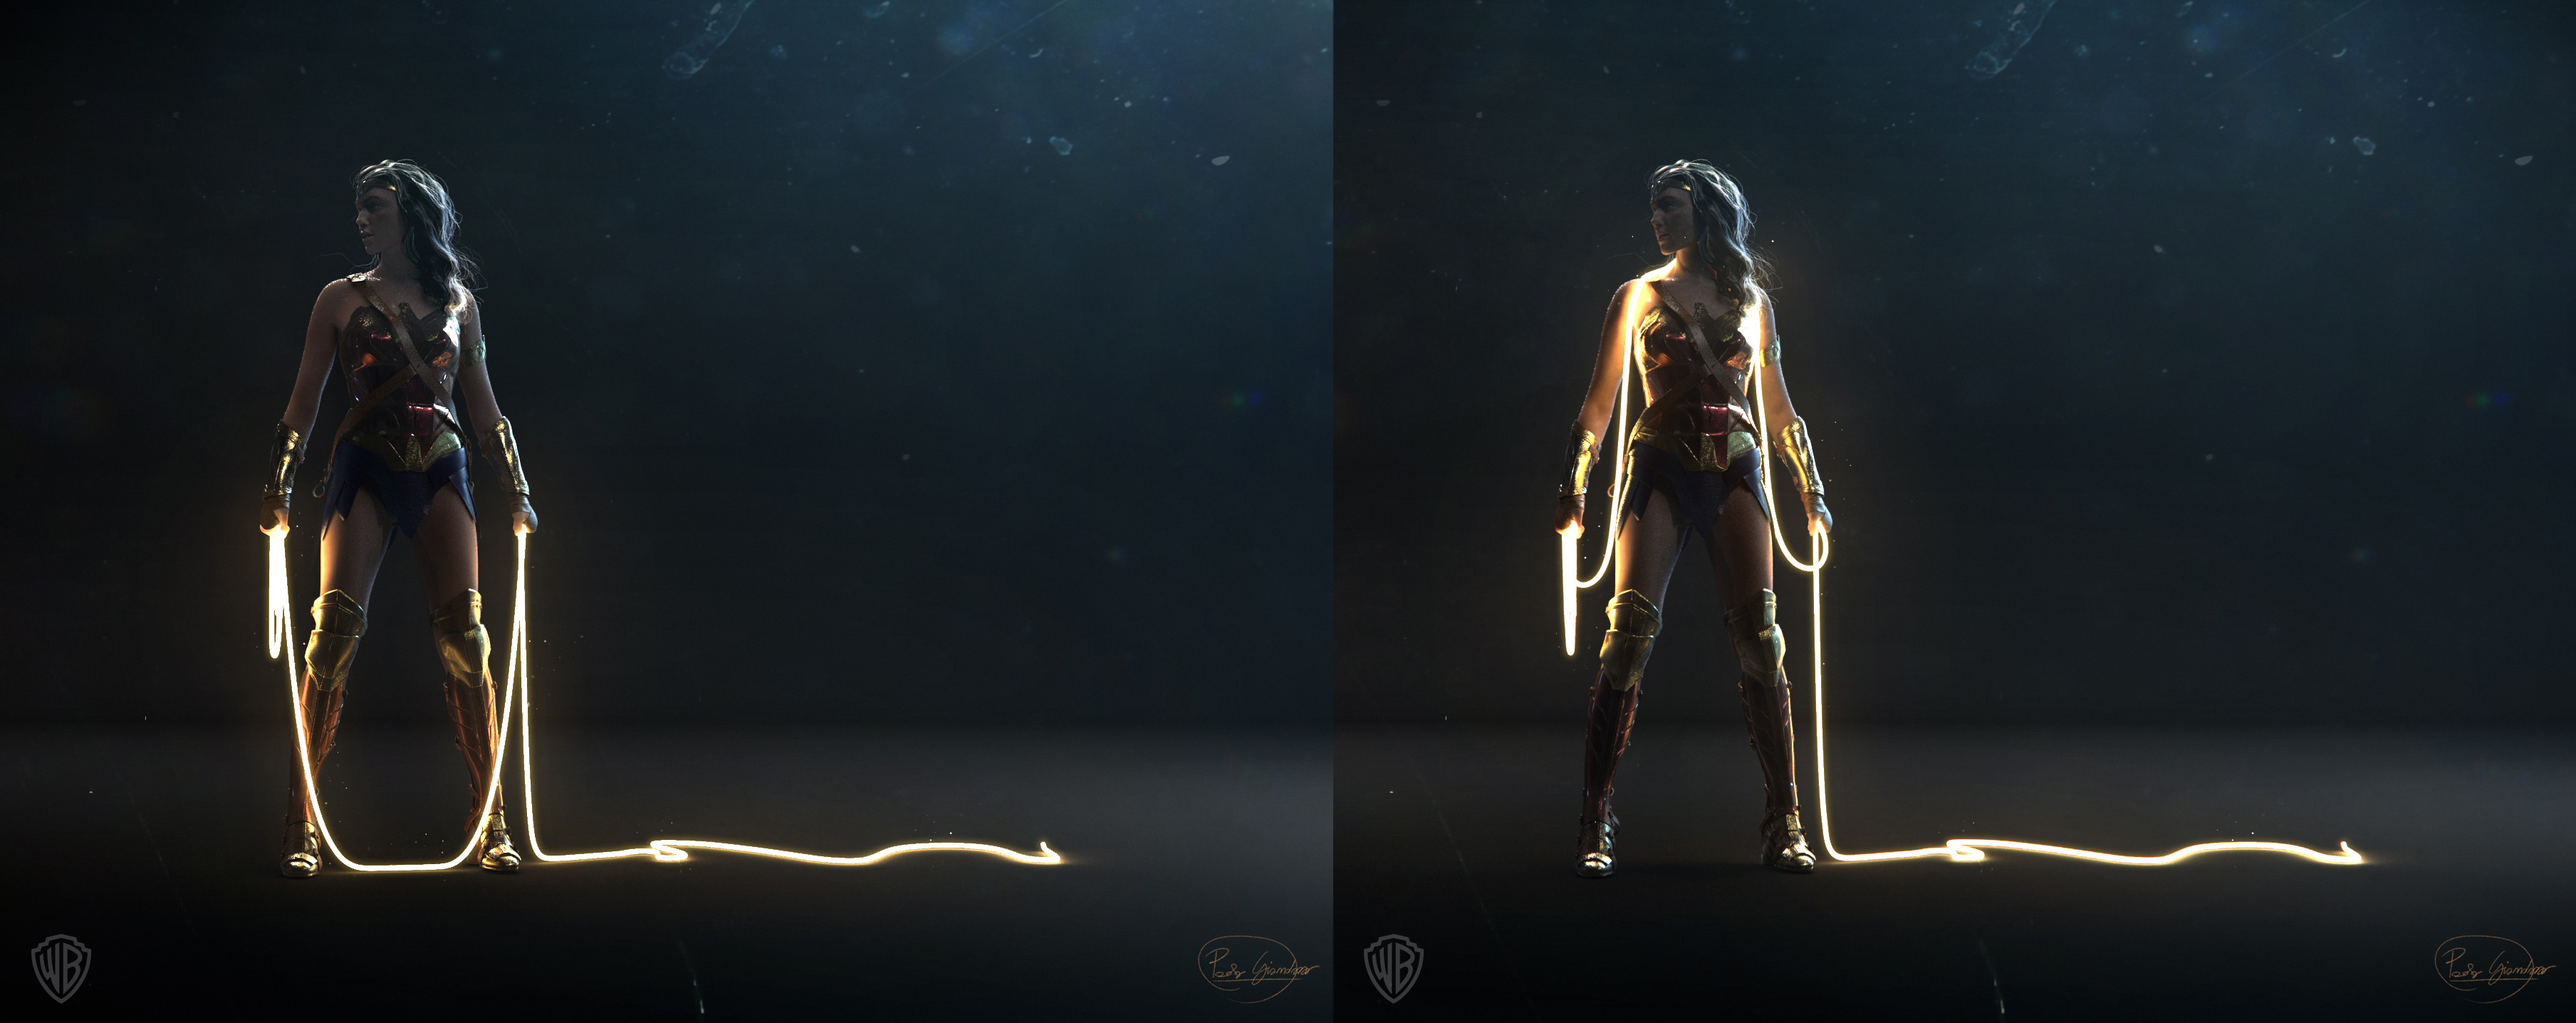 Exploring Diana's lasso as a source of light. 